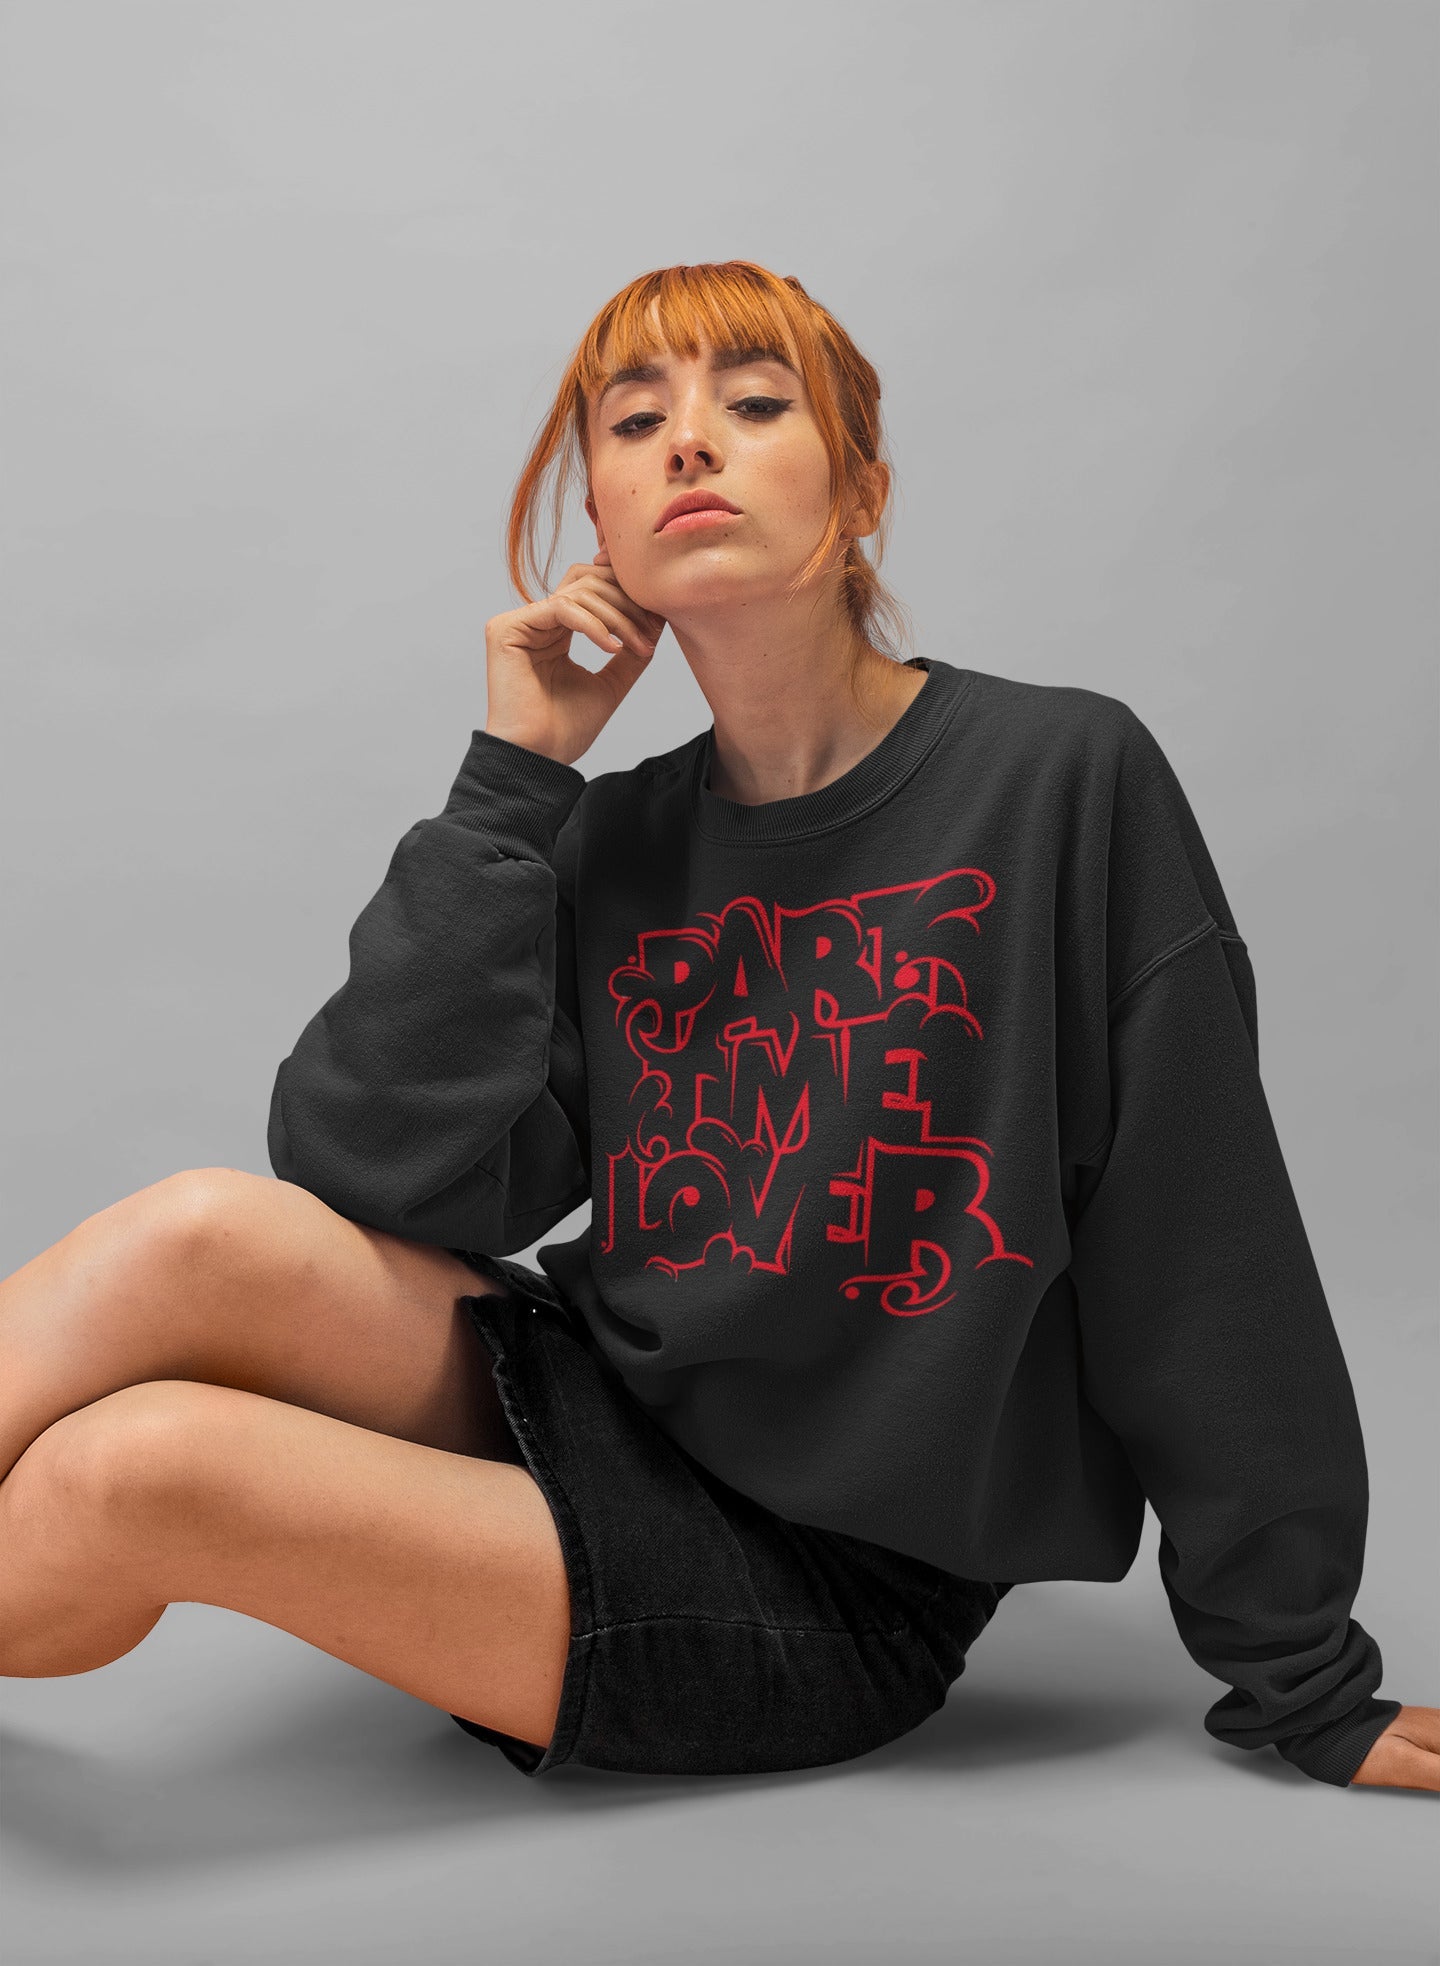 Part Time Lover relaxed Fit Sweatshirt For Women